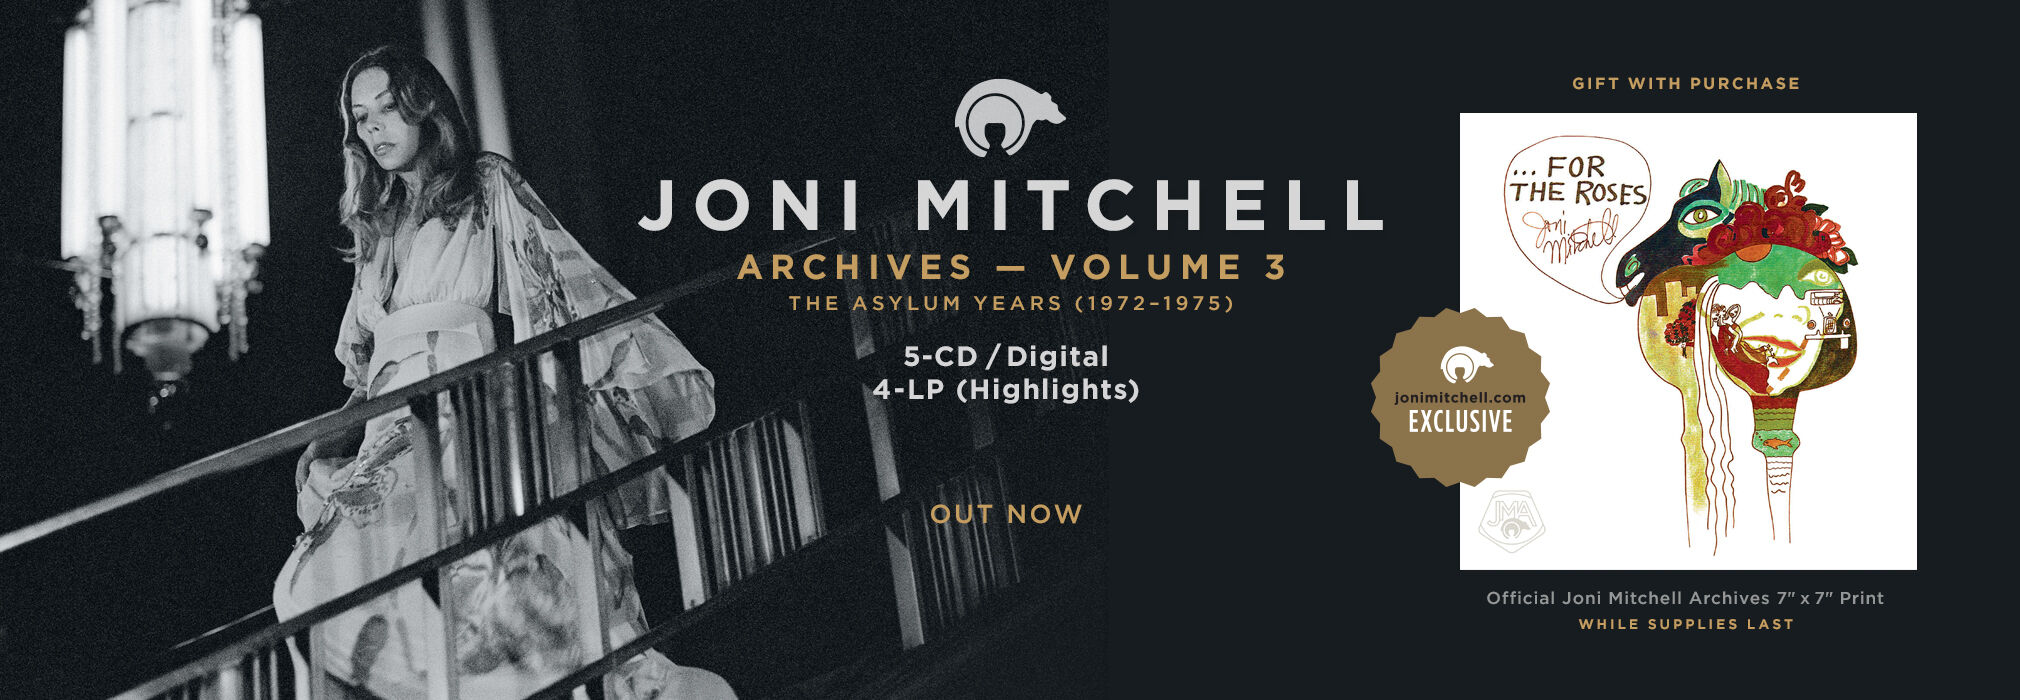 Joni Mitchell - Official Store